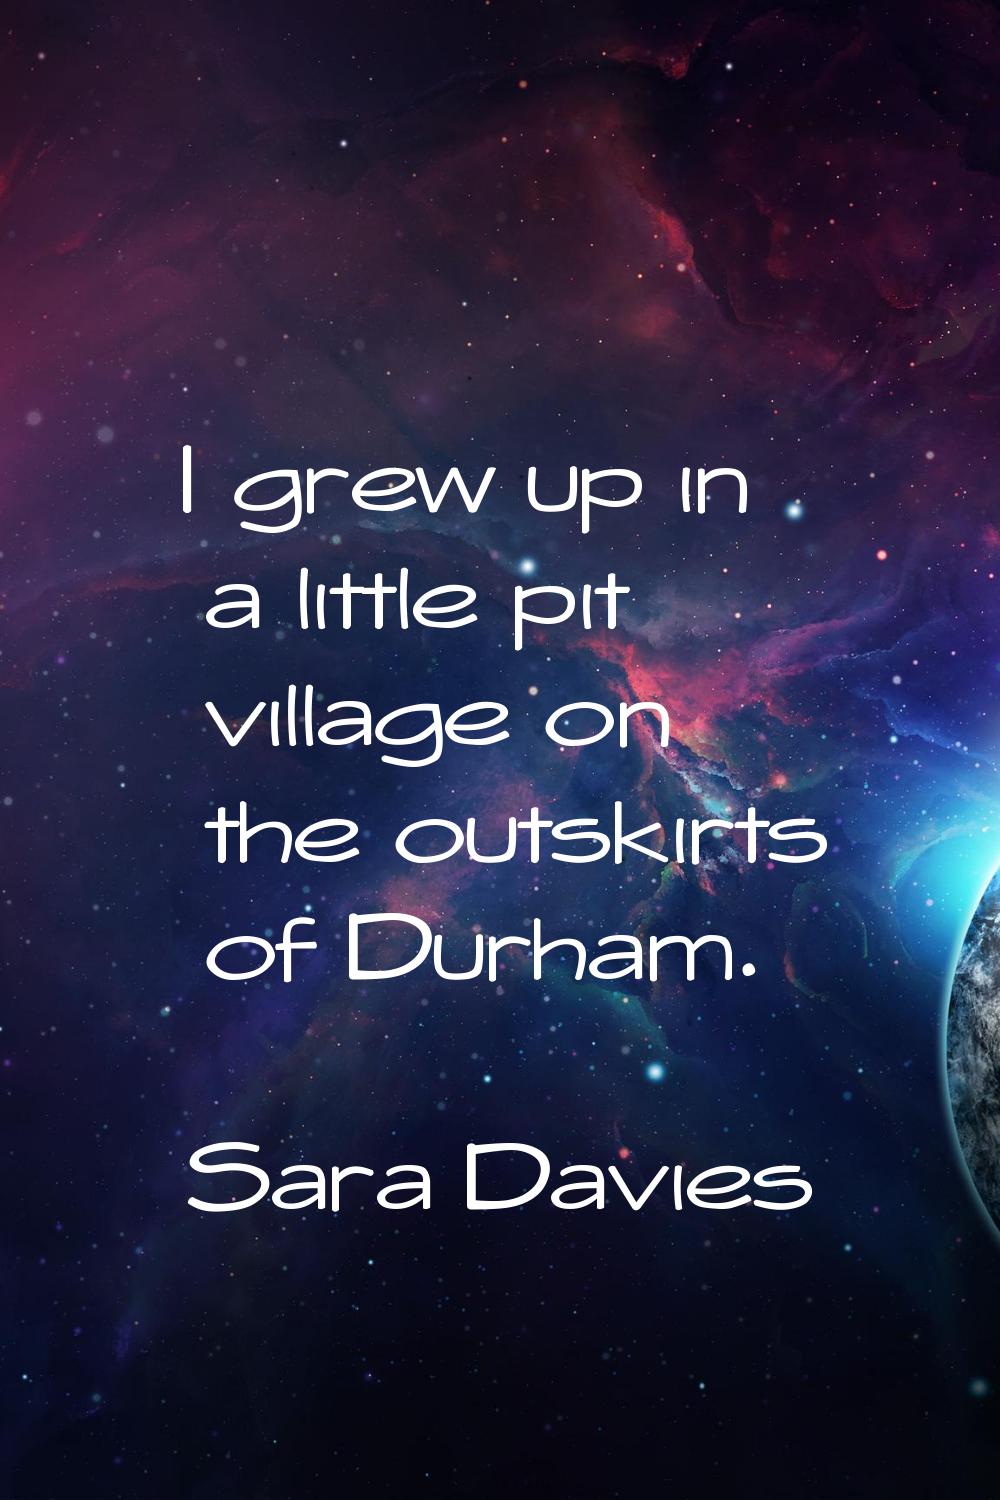 I grew up in a little pit village on the outskirts of Durham.